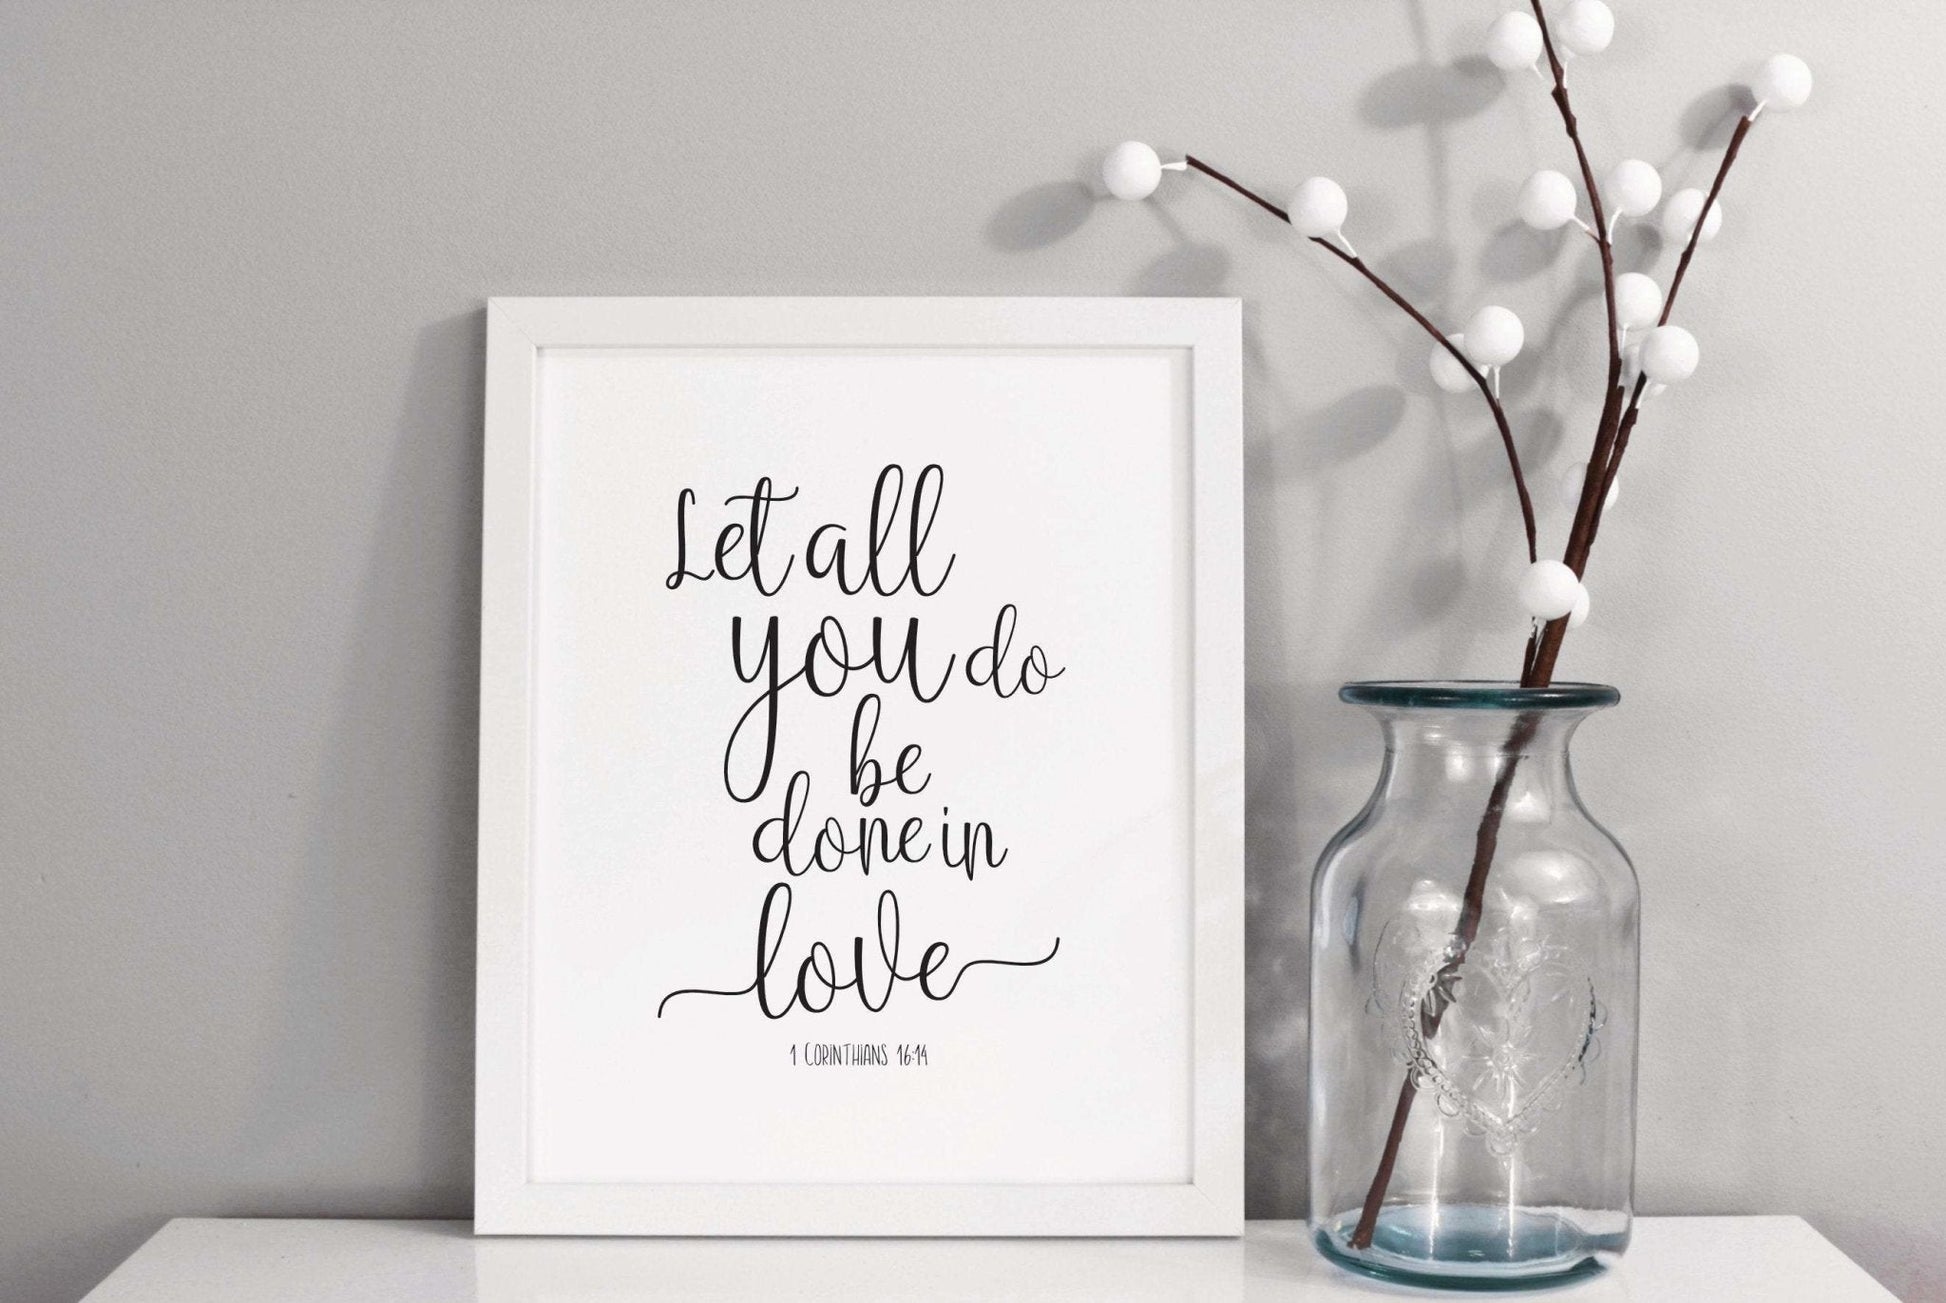 Bible verse wedding print - Dolly and Fred Designs